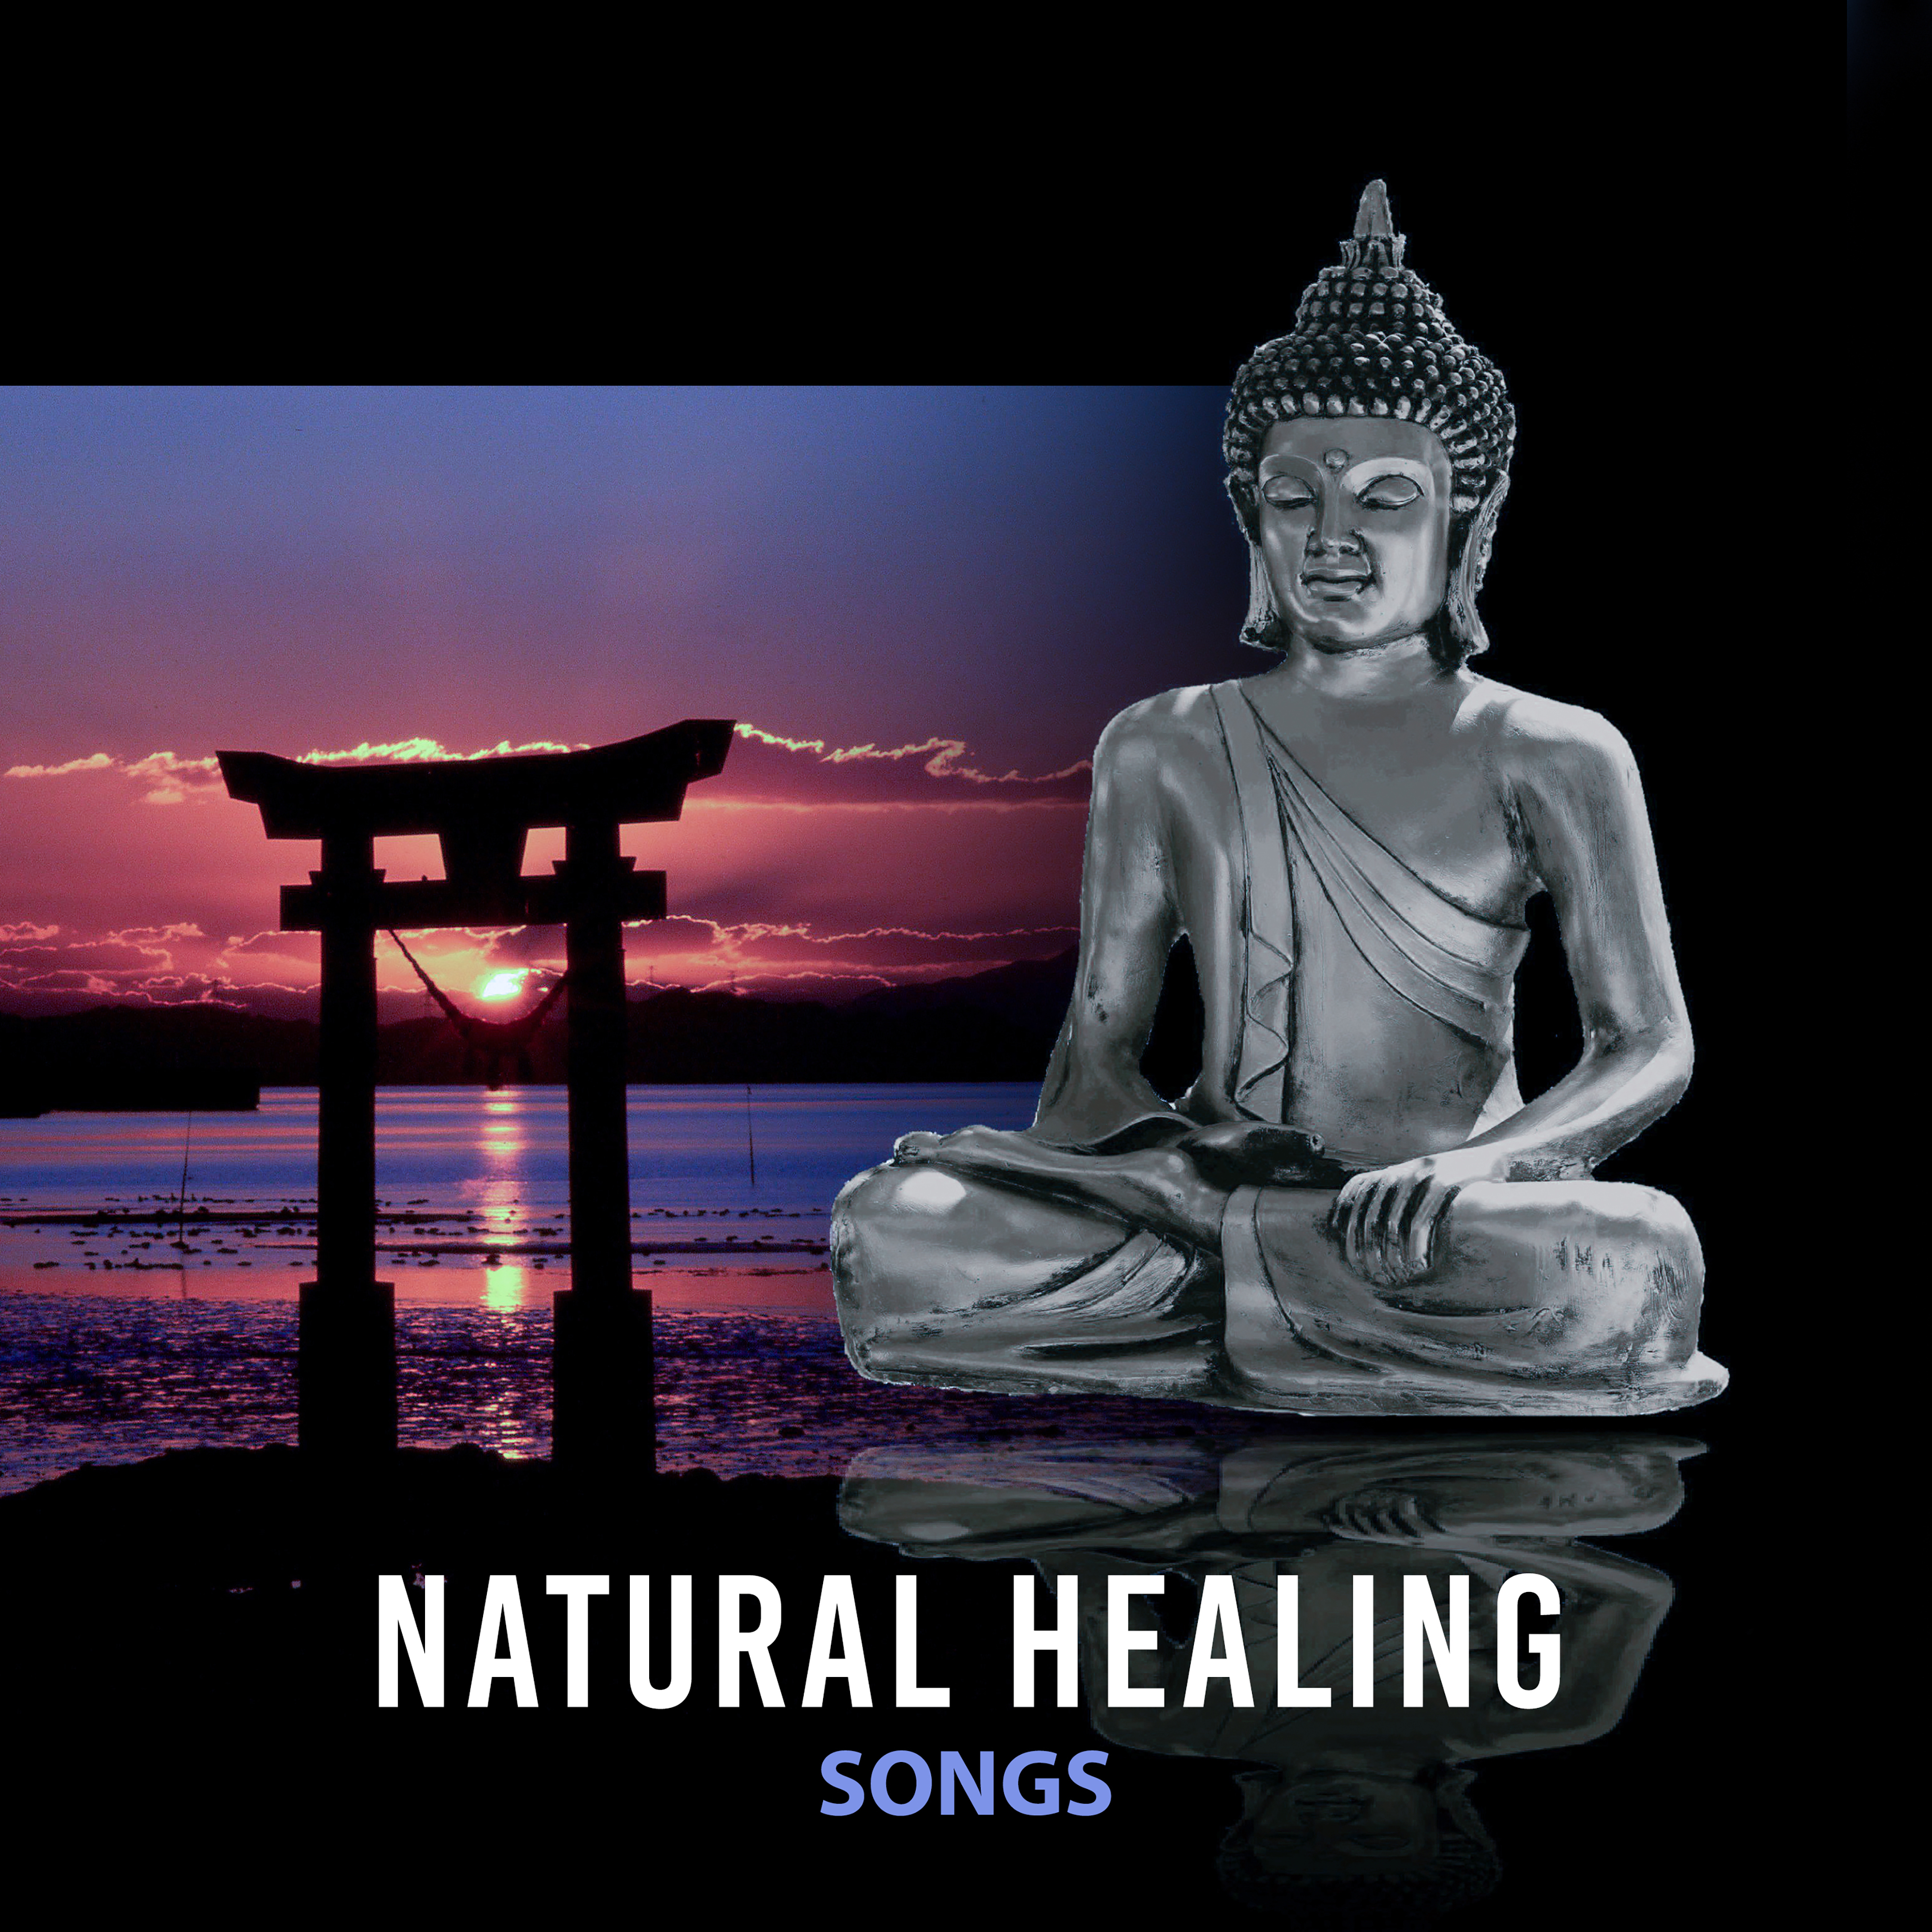 Natural Healing Songs  Peaceful Sounds of Nature for Relax, Yoga, Meditation  Music, Healing Nature